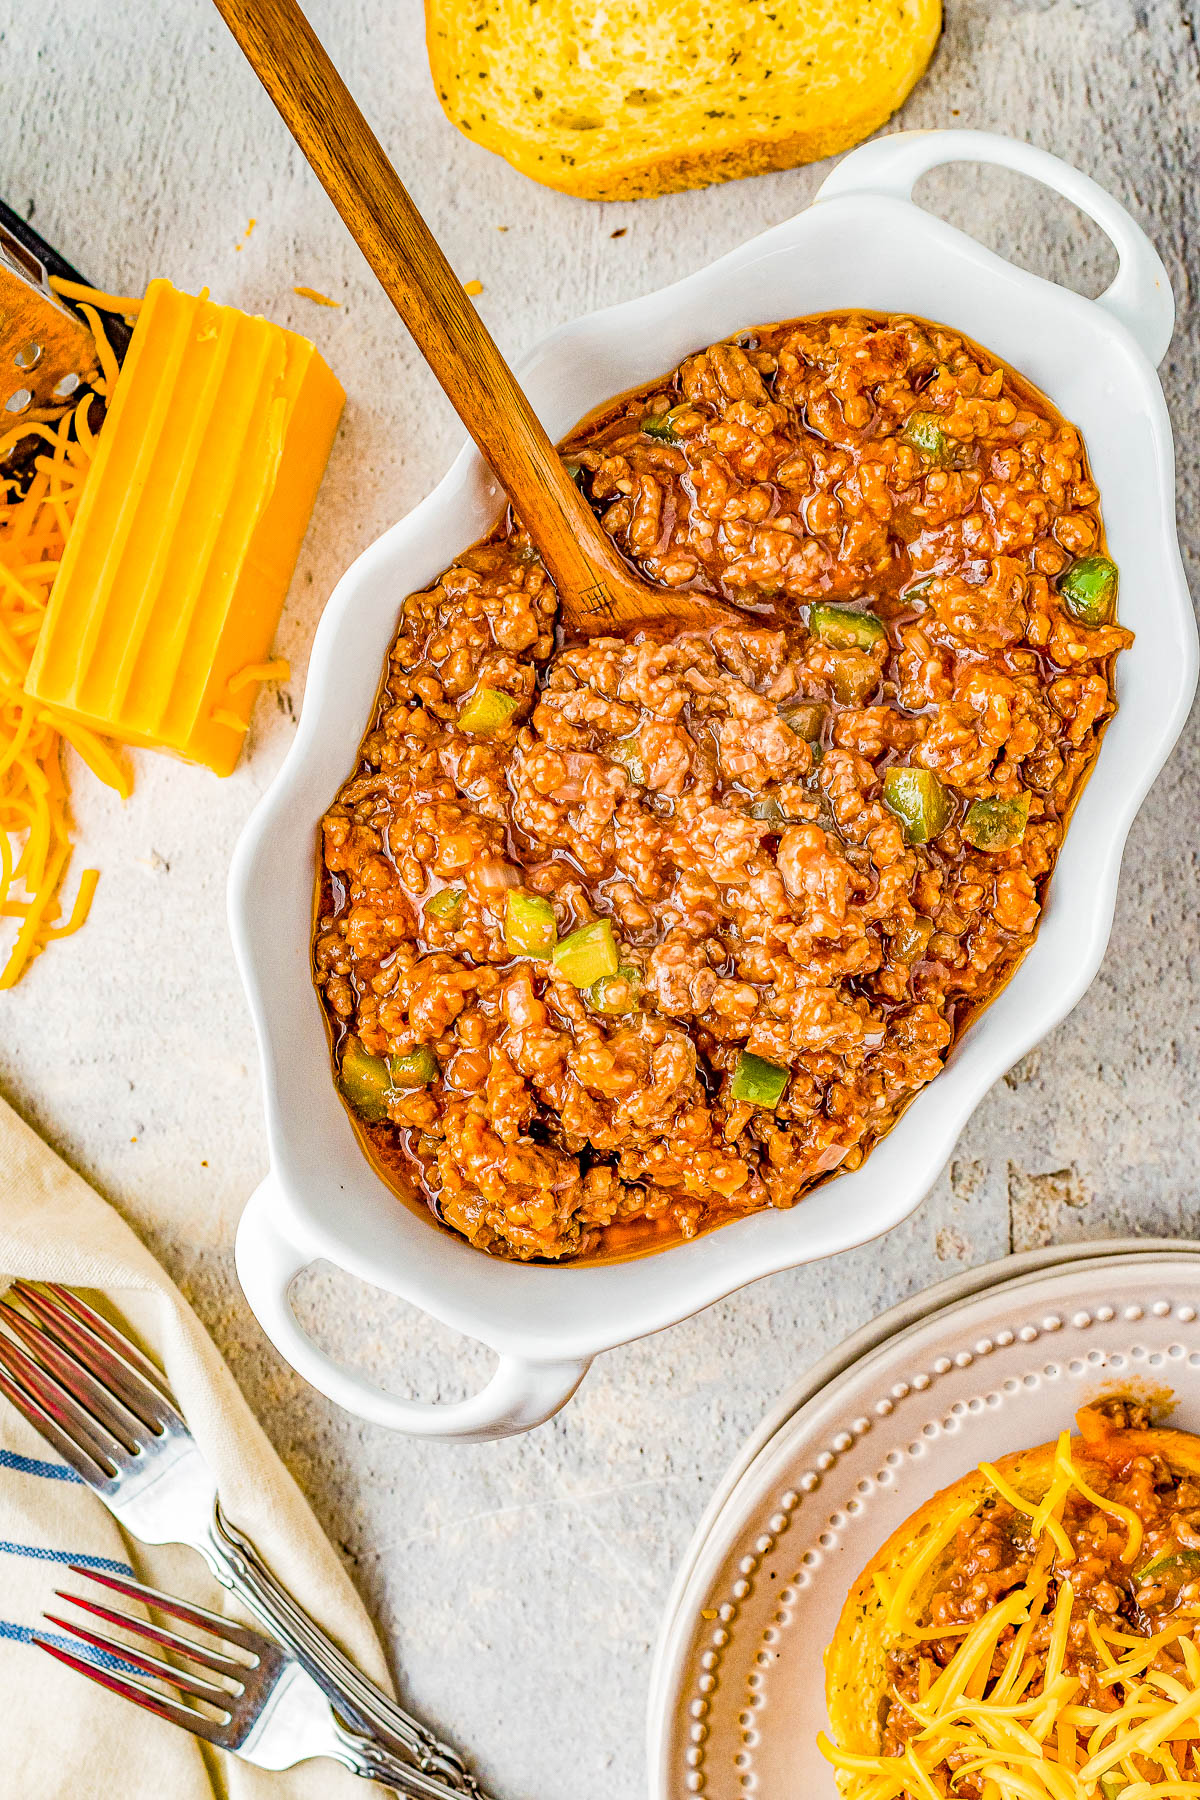 Slow Cooker Cheesy Sloppy Joes - Homemade sloppy Joes just got even better because they're cheesy! The perfect combination of sweet, tangy, optional spiciness, and so juicy! Whether you want to prep them before work for an easy weeknight dinner that's waiting, serve them at a summer holiday party, or for tailgating or a game day event, they're a classic family FAVORITE recipe and so EASY! Stovetop directions also provided.